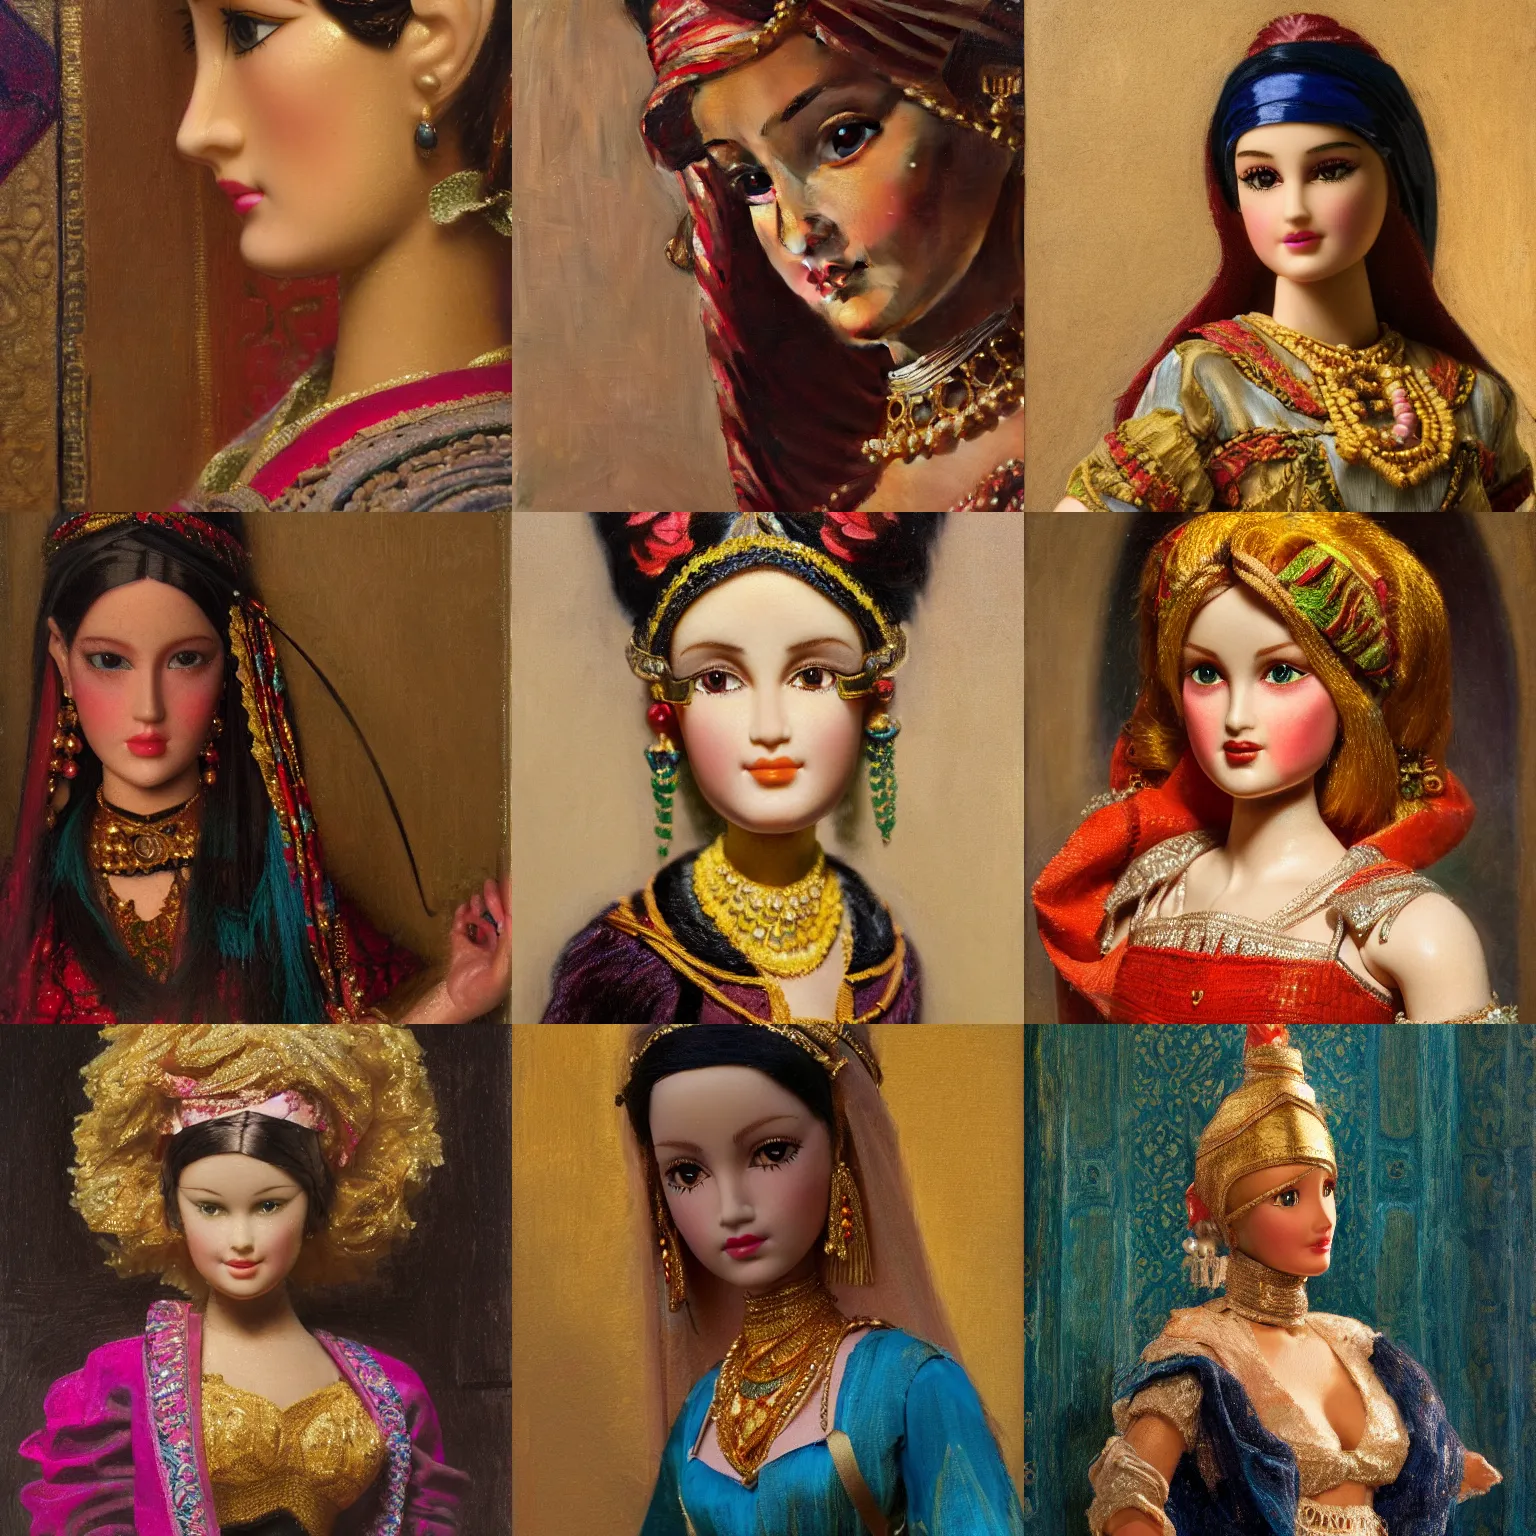 Prompt: orientalism character detail of a barbie doll by edwin longsden long and theodore ralli and nasreddine dinet and adam styka, masterful intricate art. oil on canvas, excellent lighting, high detail 8 k